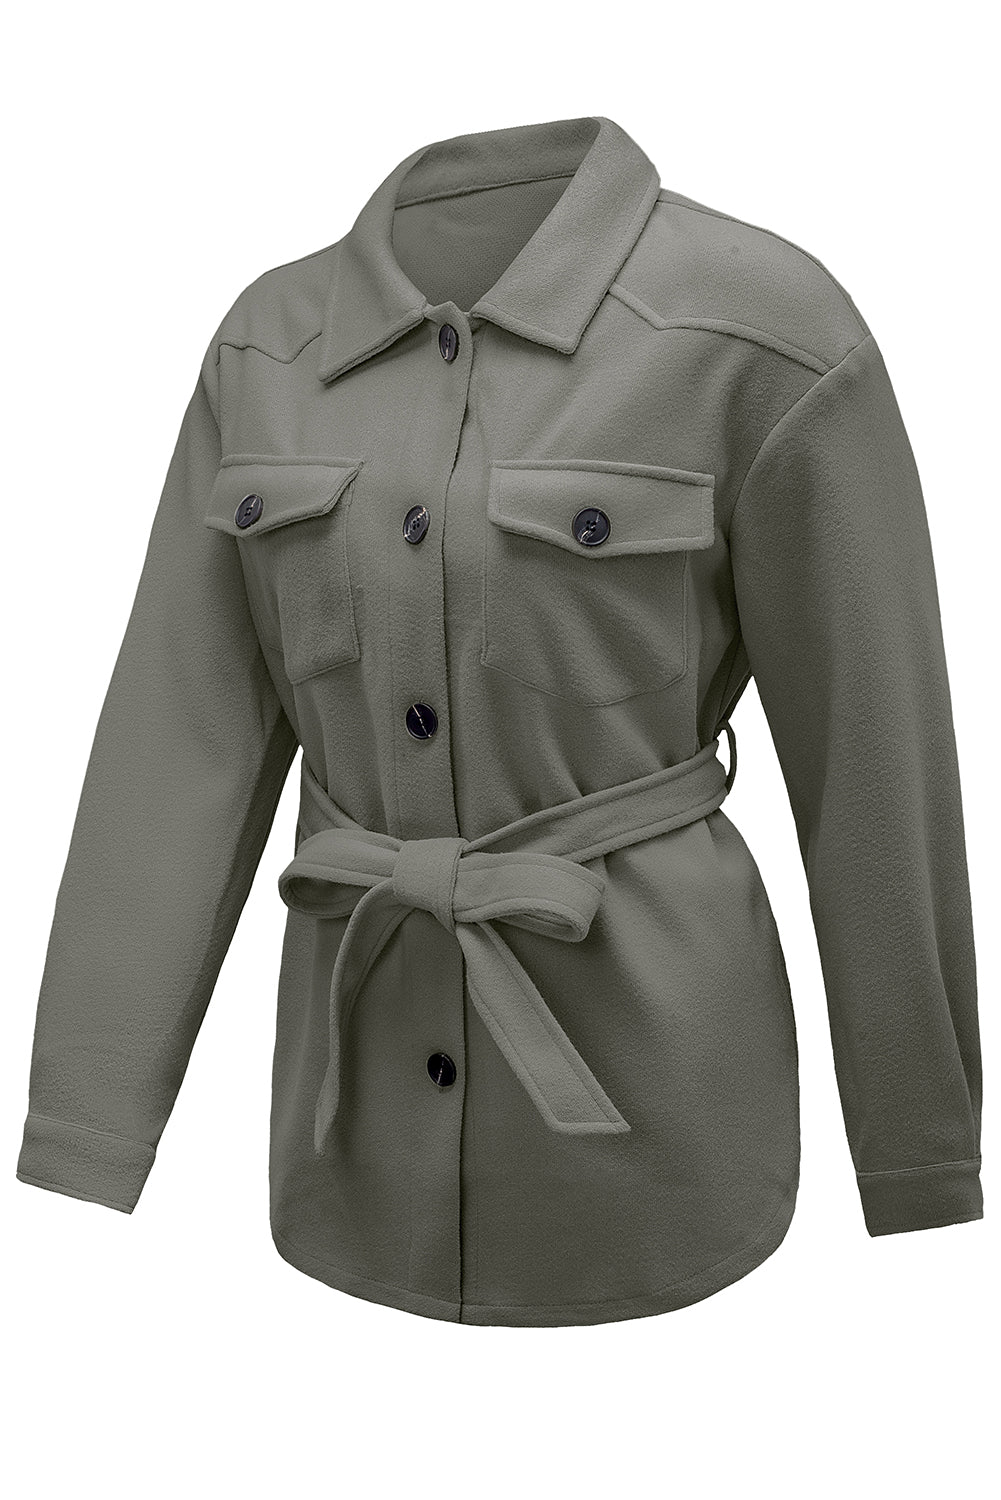 Gray Women's Lapel Button Down Coat Winter Belted Coat with Pockets LC8511359-11